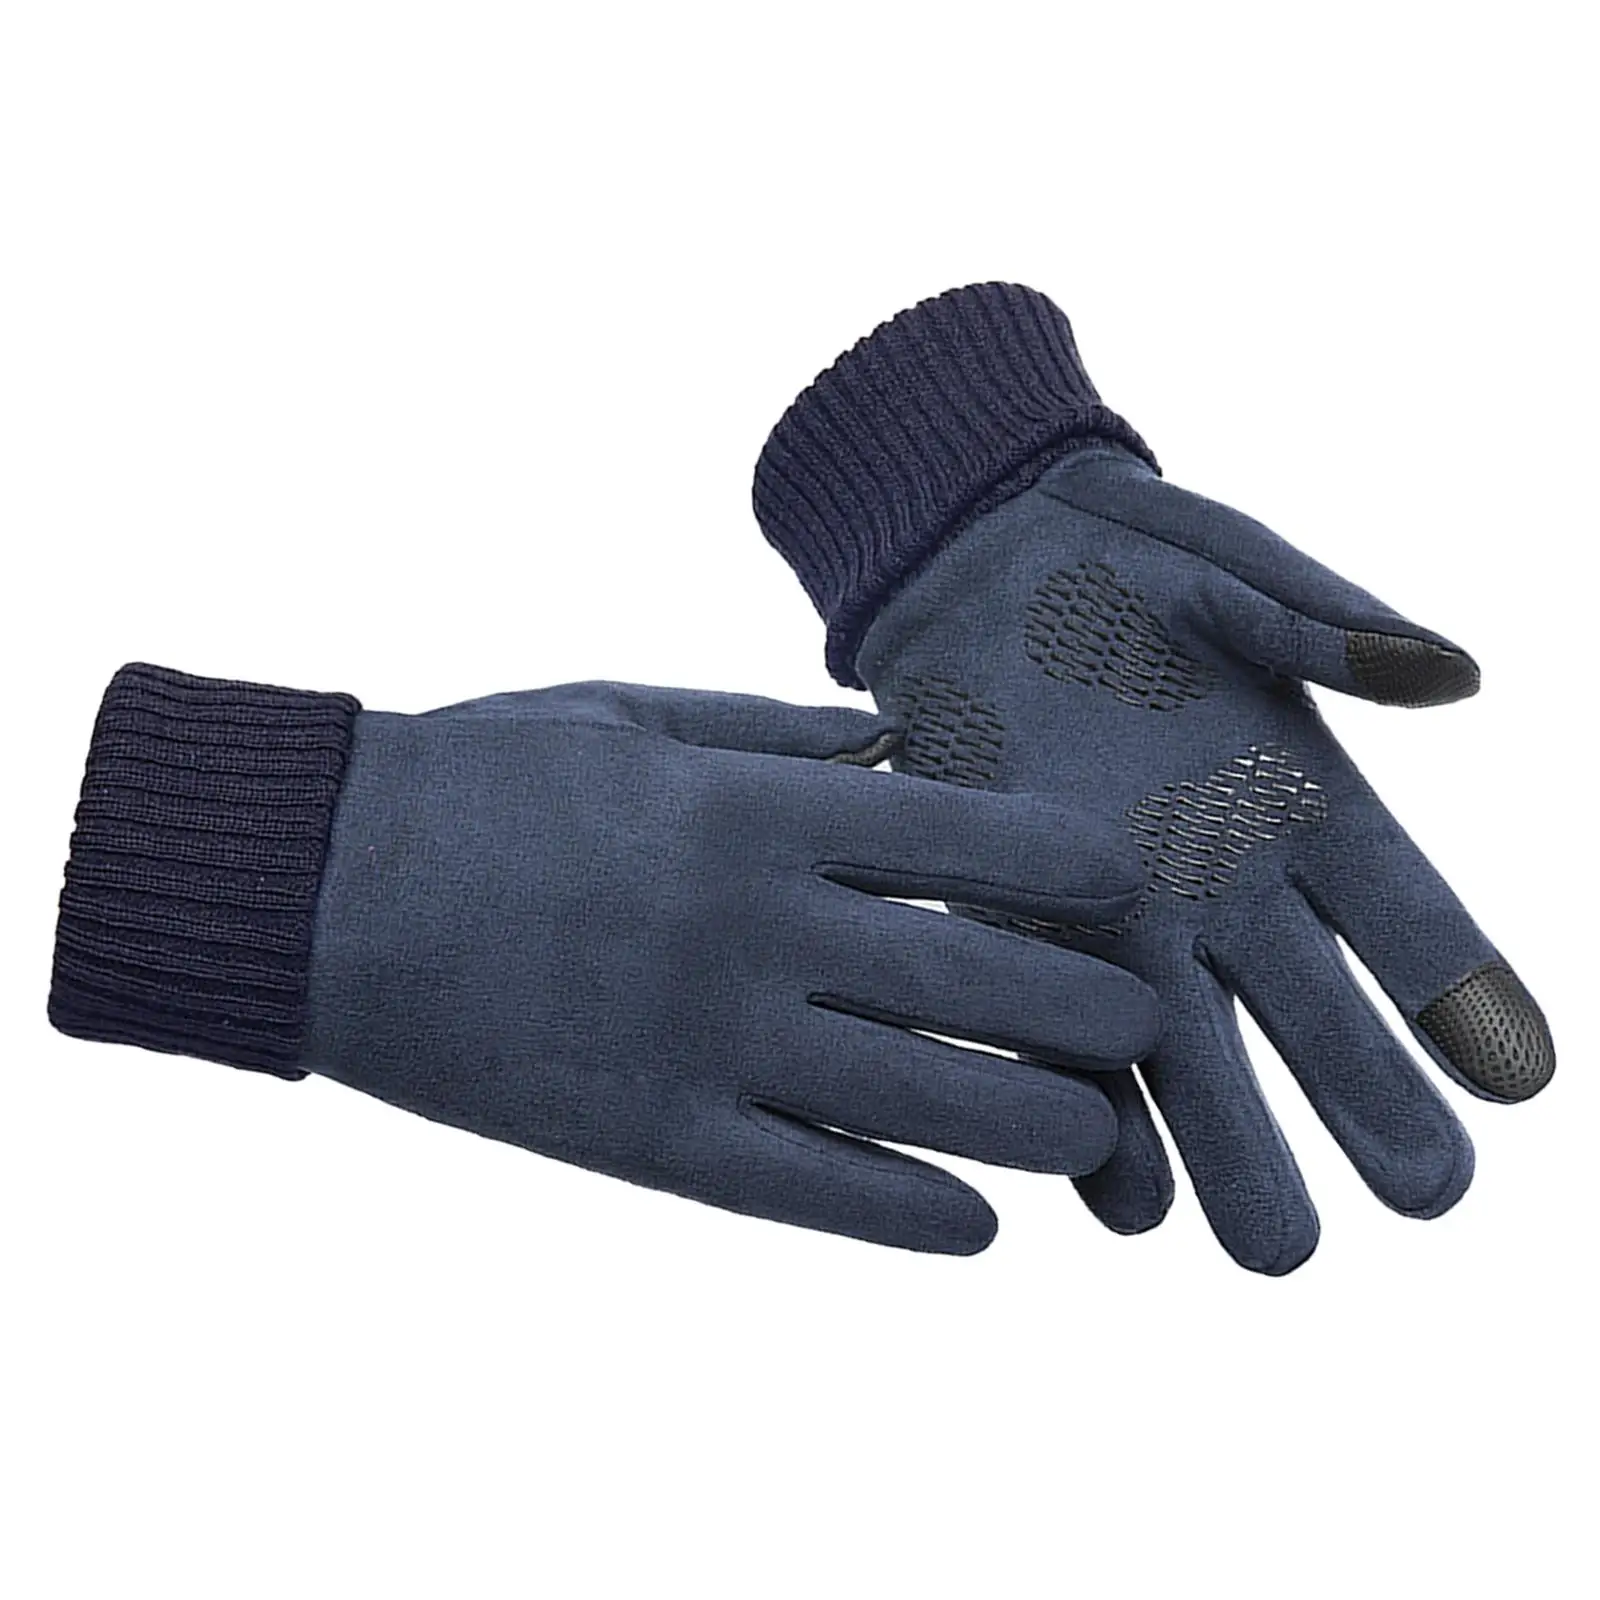 Winter Warm Gloves Mittens Liner Glove Lightweight Full Touch Screen Cycling Gloves Mens Outdoor Activities Sports